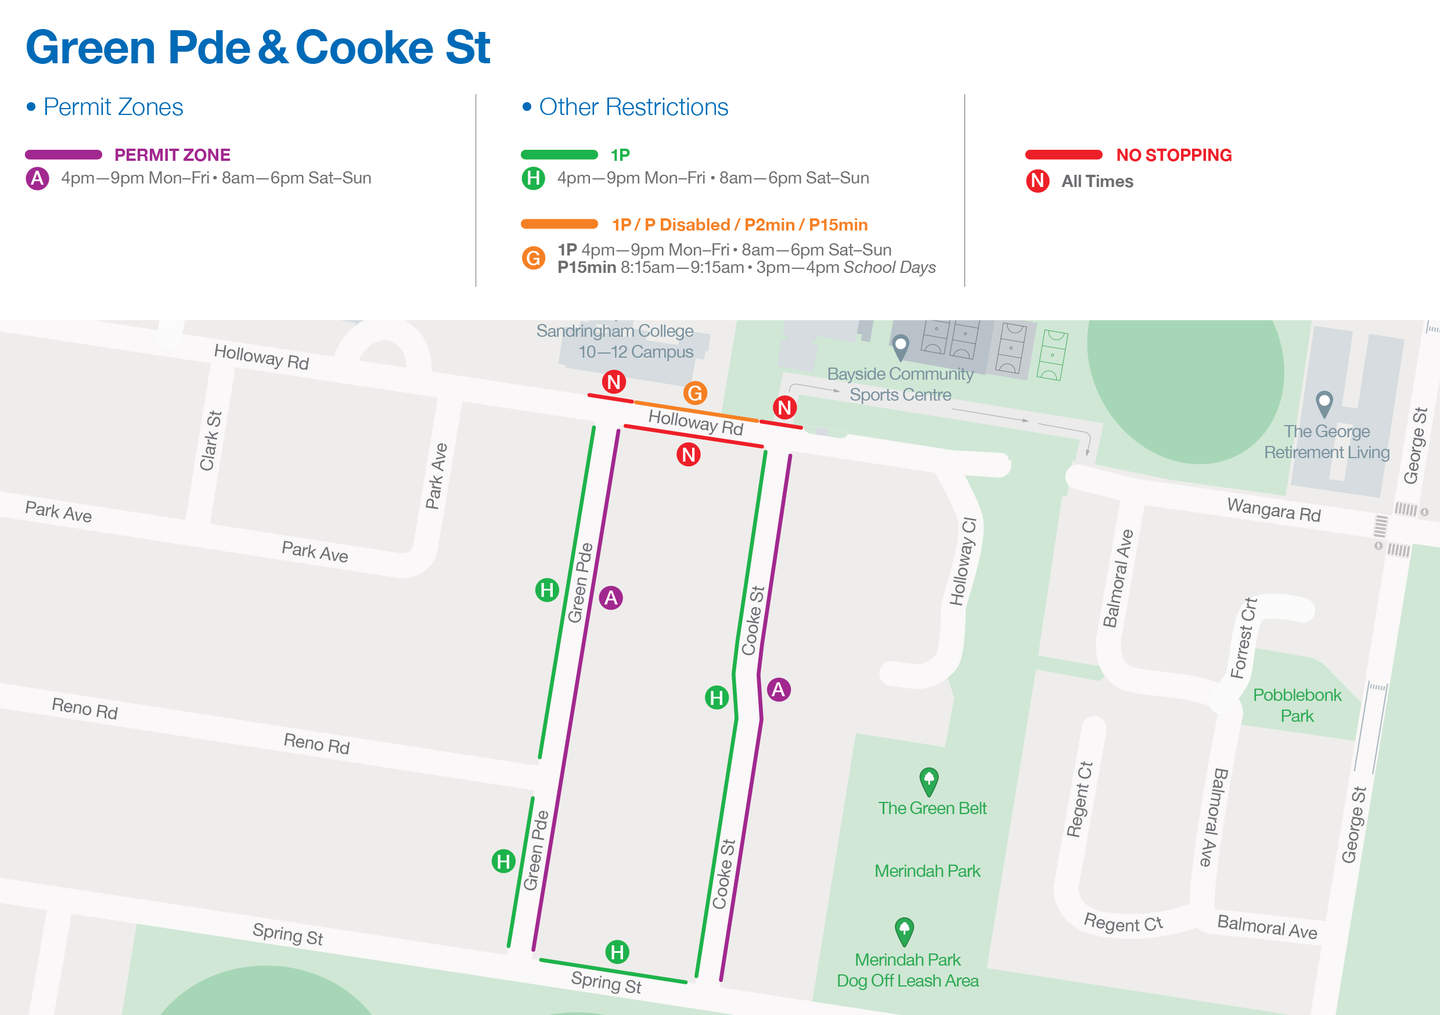 Netball Centre parking restrictions on Green Parade and Cooke Street